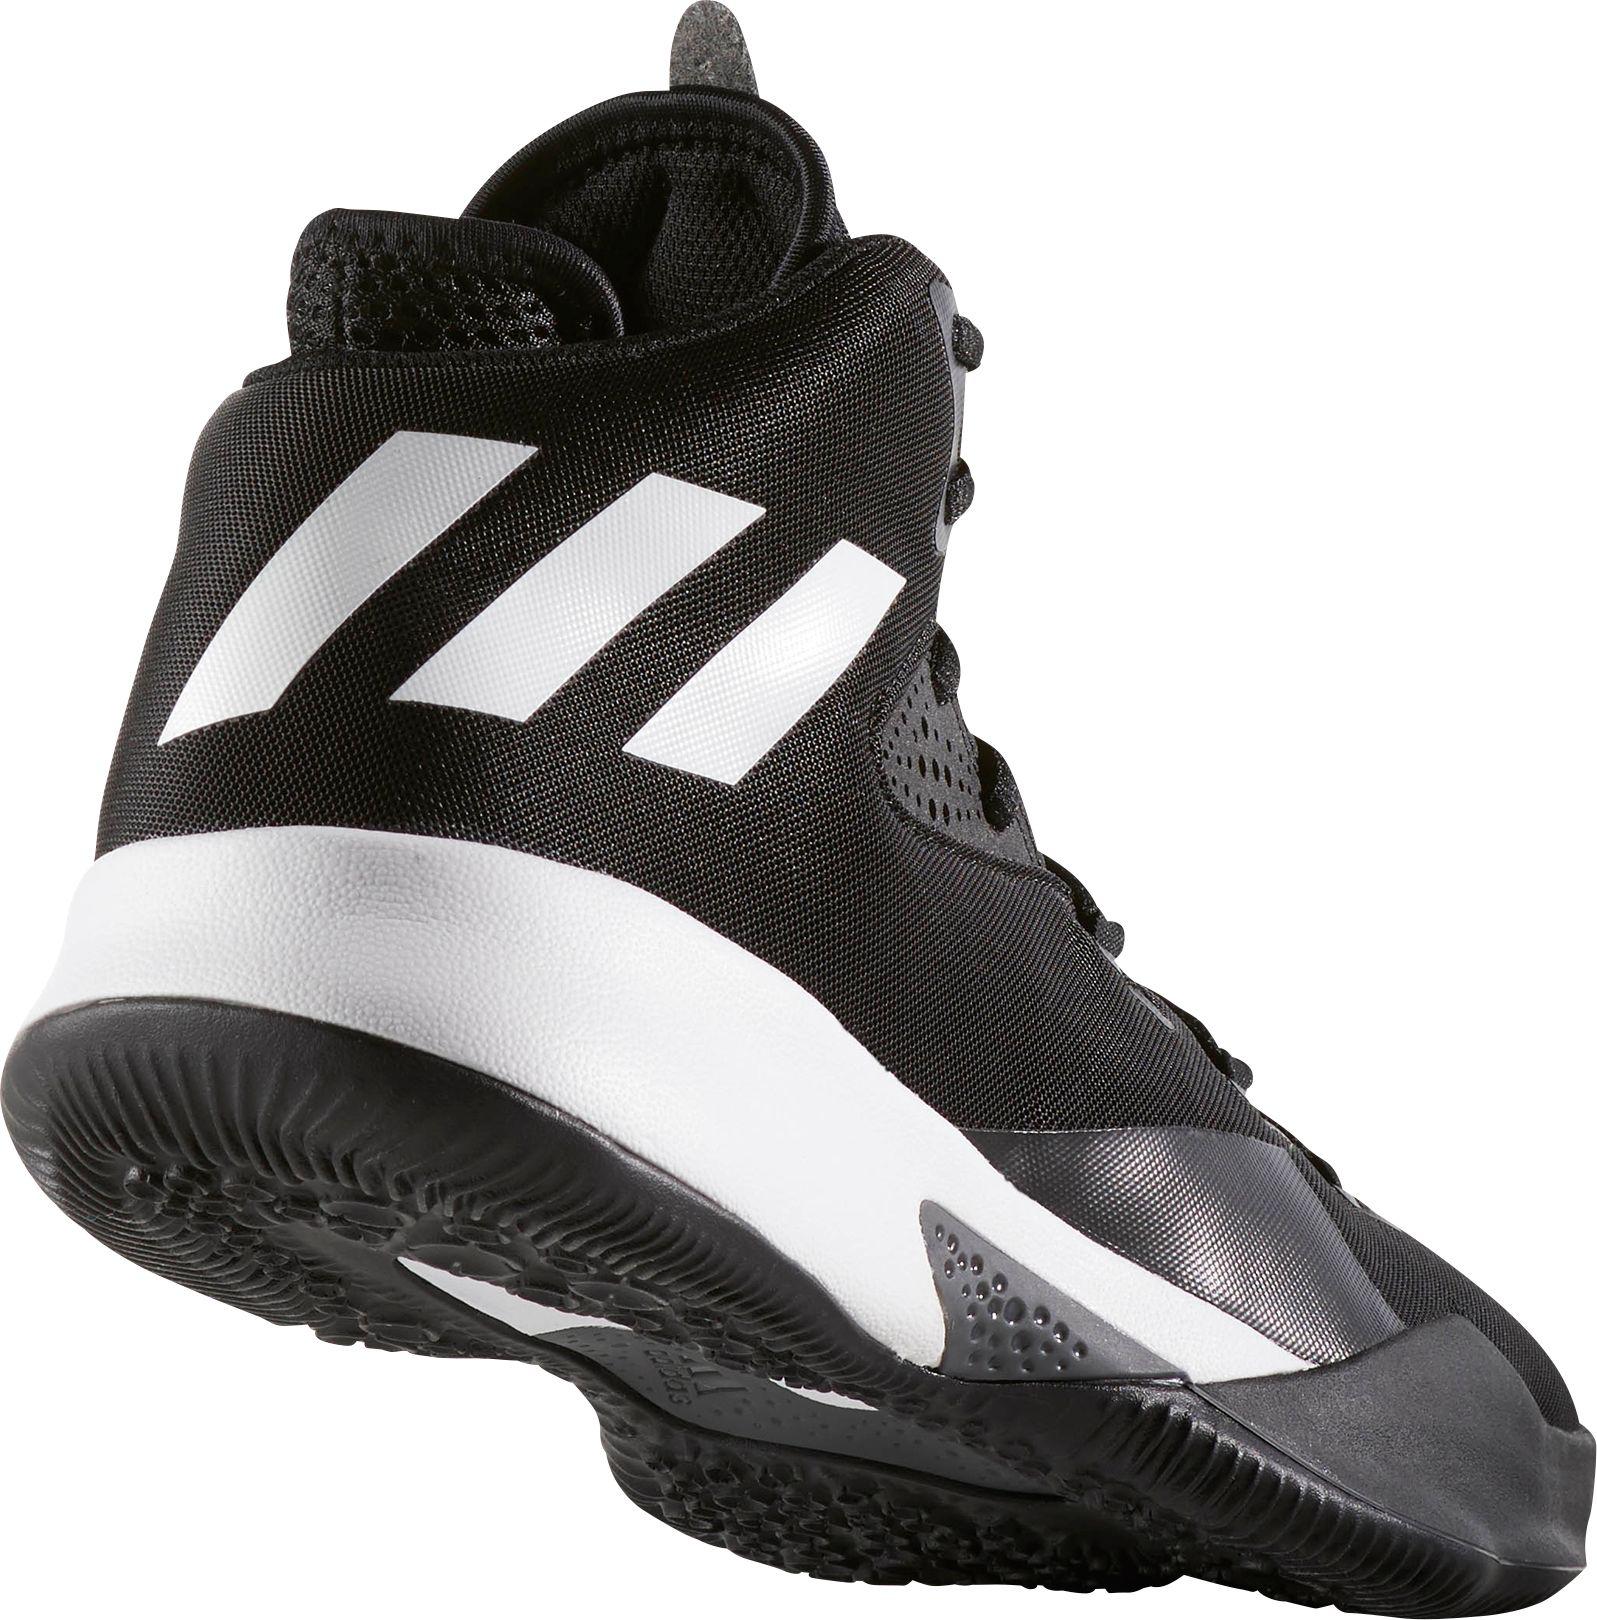 adidas Rubber Dual Threat 2017 Basketball Shoes in Black/White (Black ...